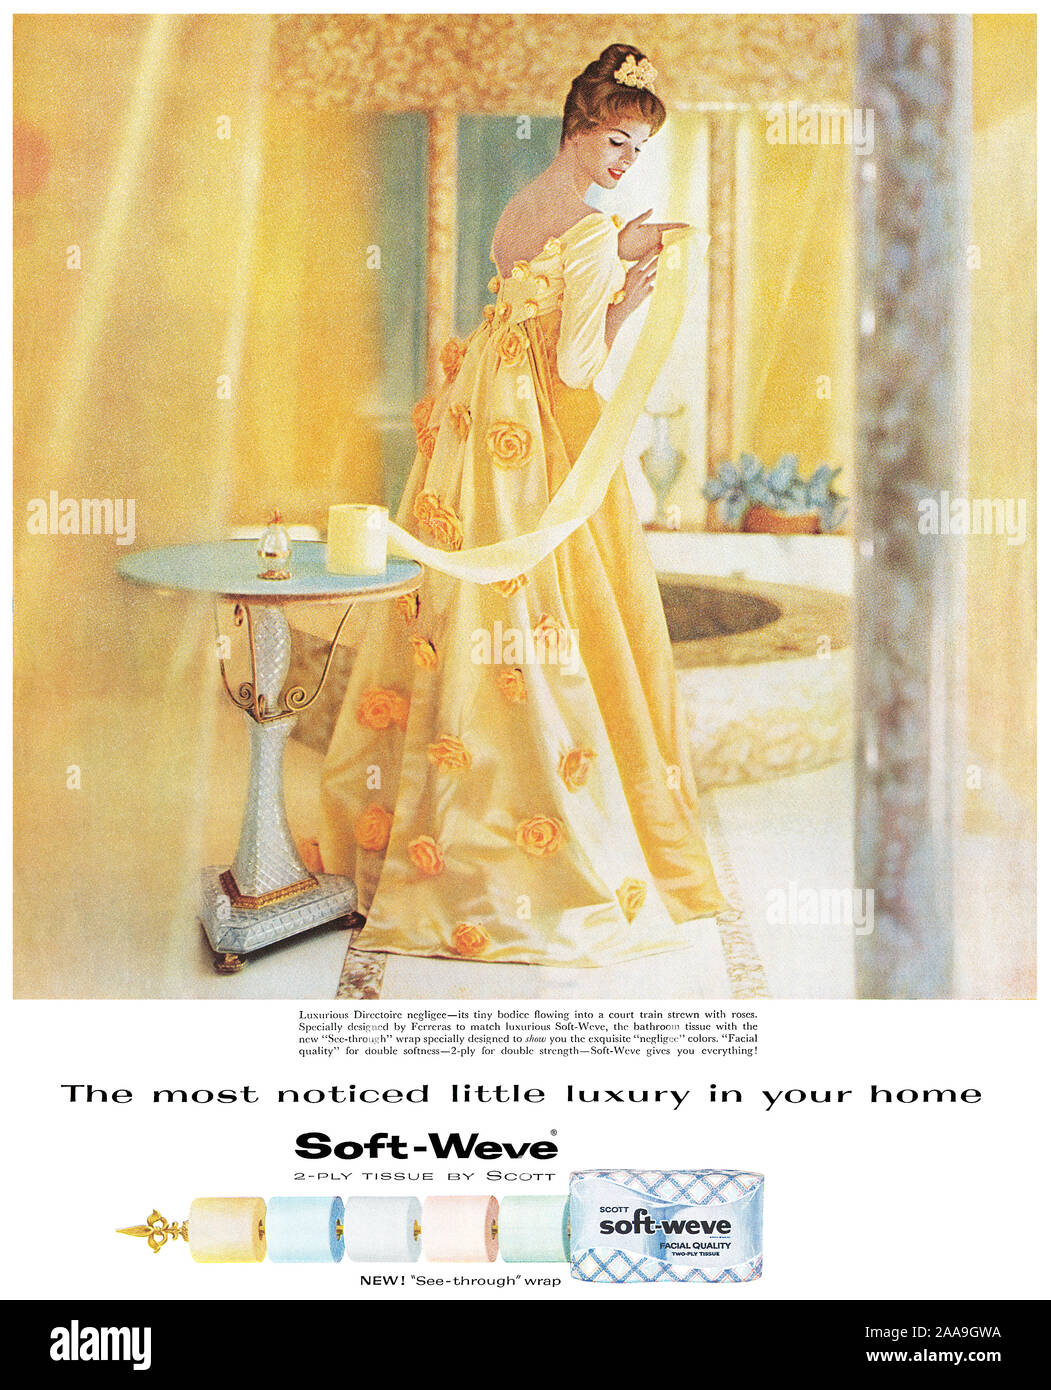 1959 U.S. advertisement for Soft-Weve toilet paper by Scott Stock Photo -  Alamy